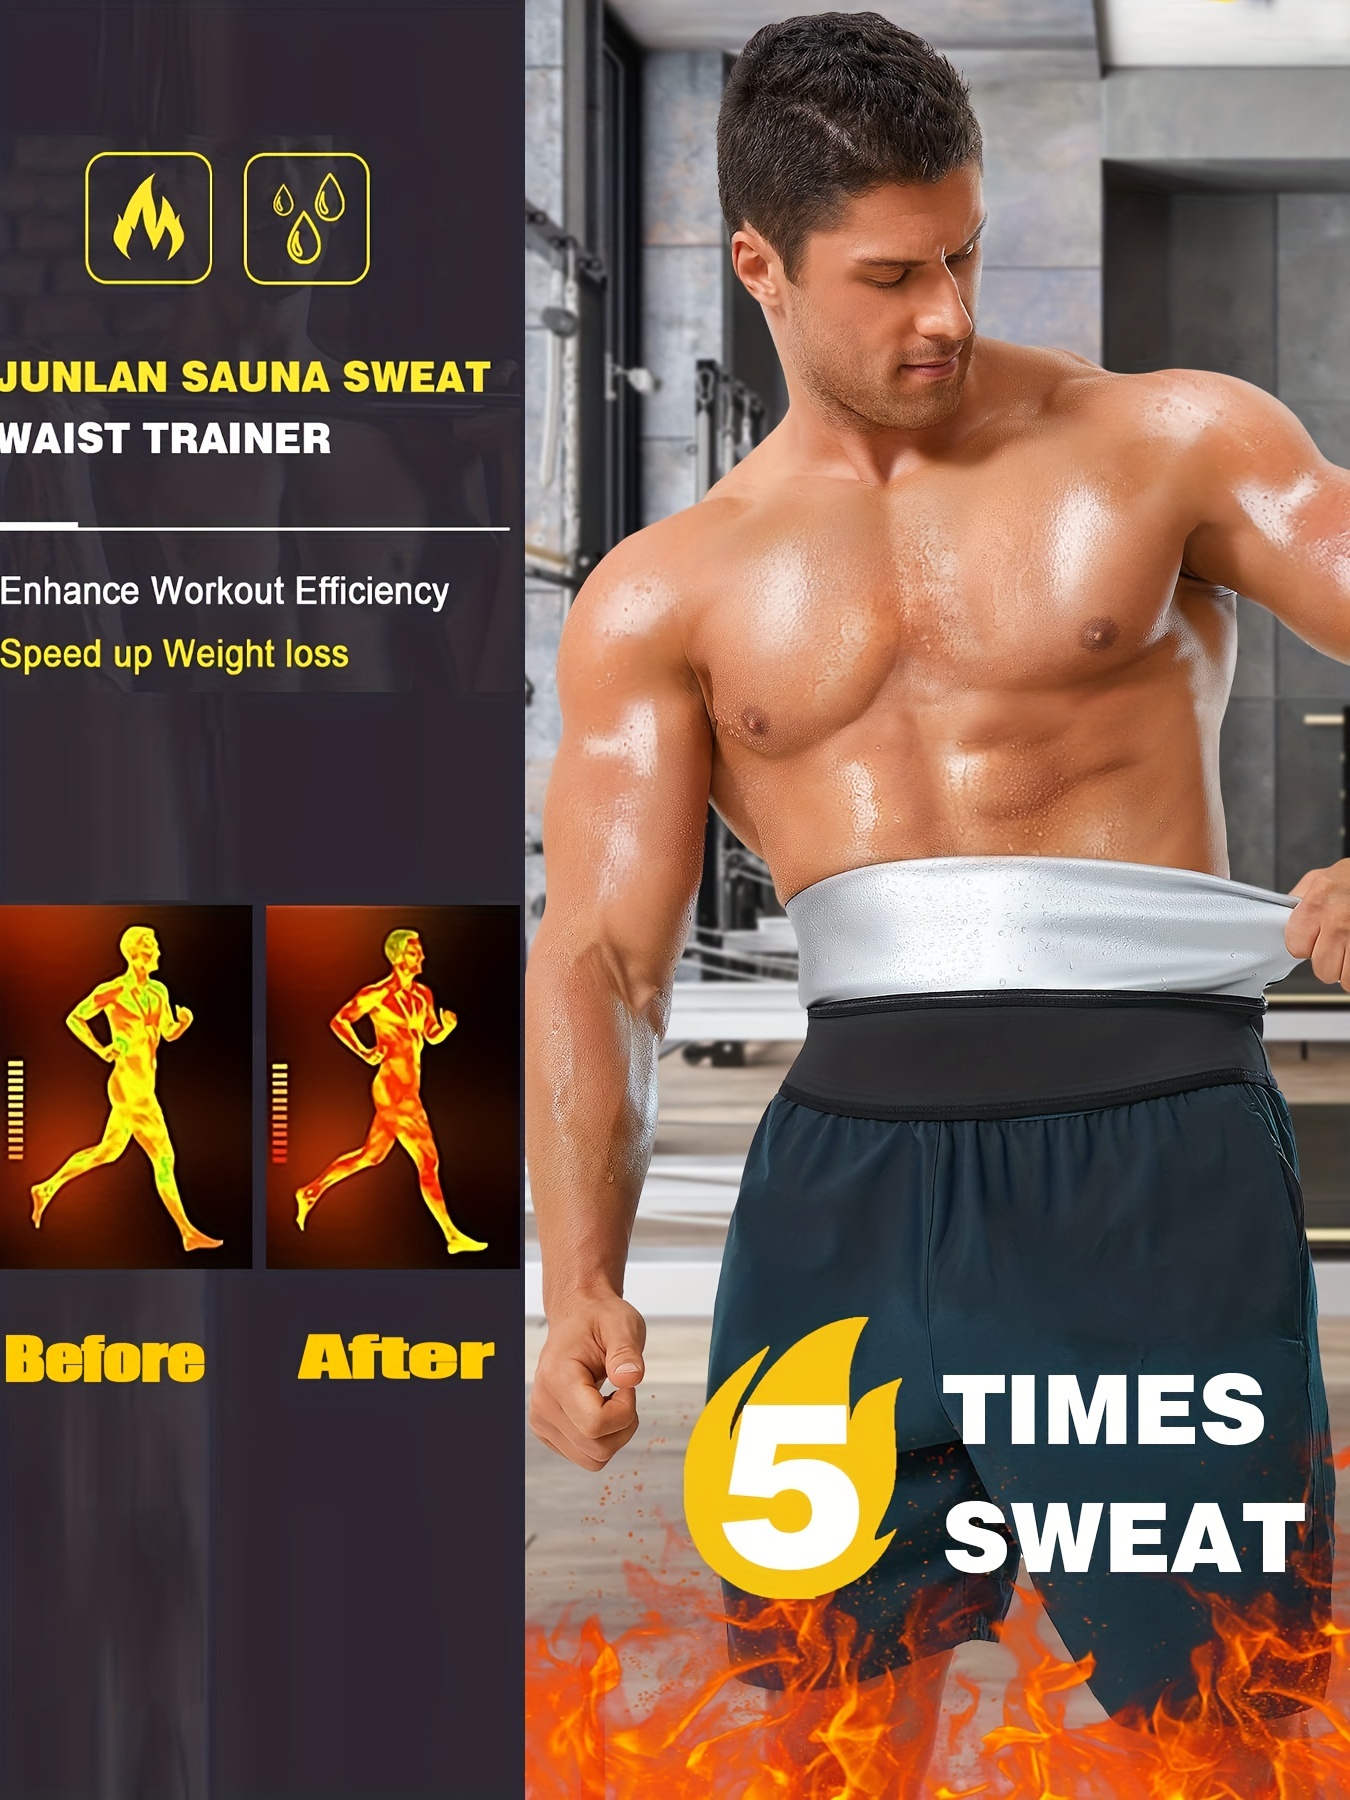 Fat burning and slimming sweat shaper for fitness and training